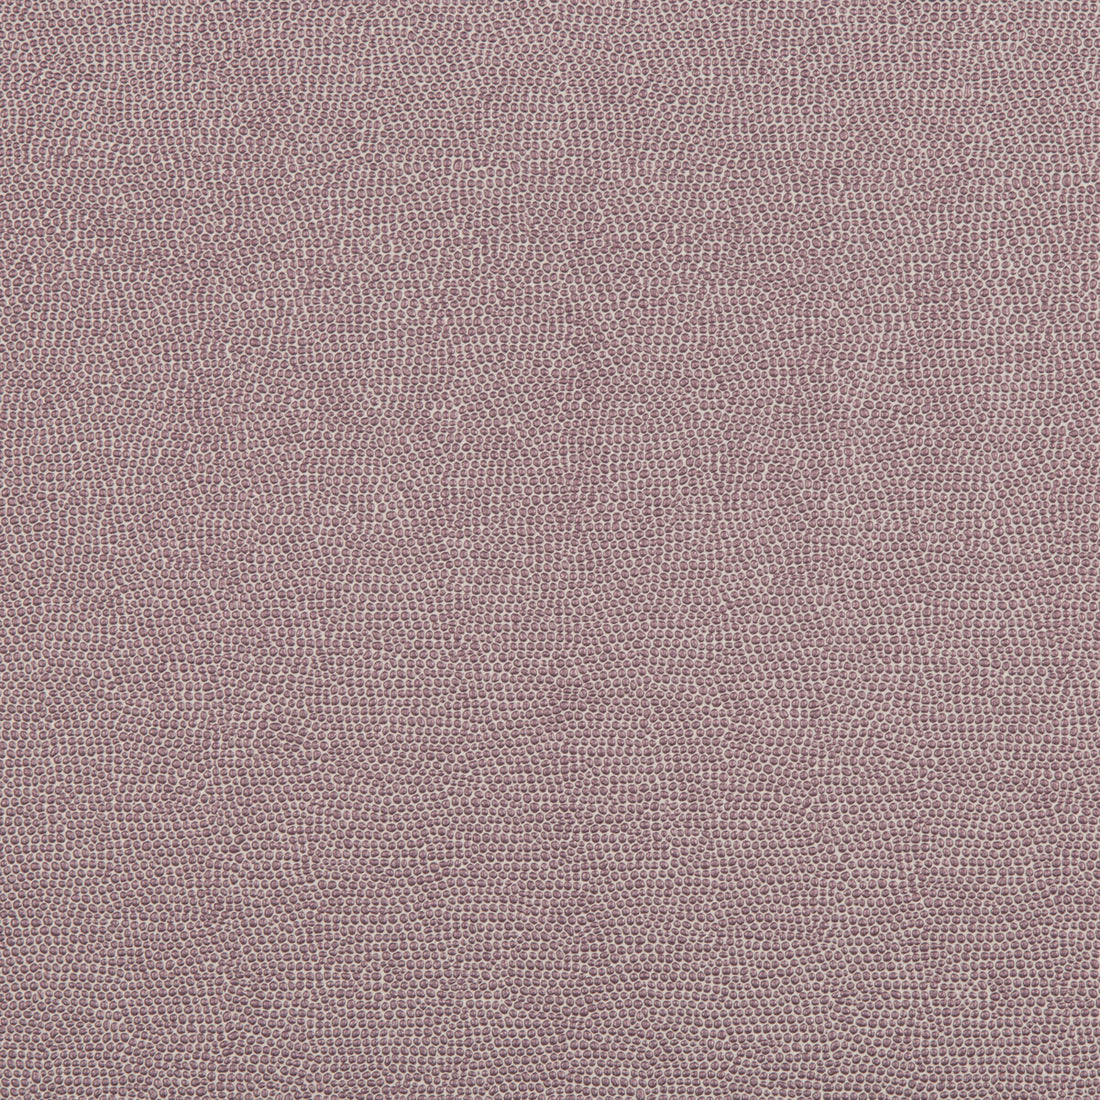 Spartan fabric in grape color - pattern SPARTAN.10.0 - by Kravet Contract in the Faux Leather Extreme Performance collection